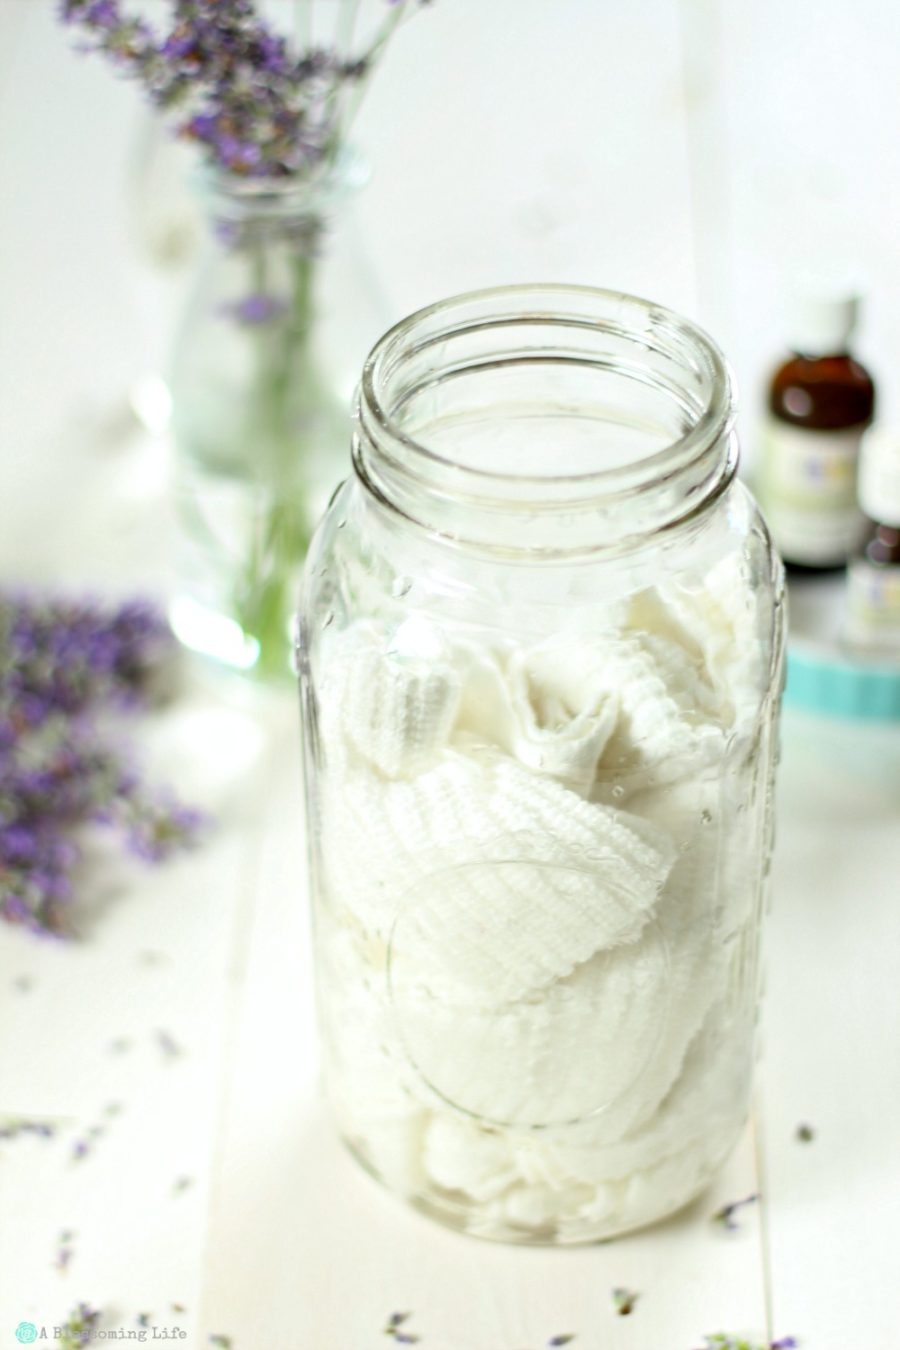 Homemade Natural Disinfecting Wipes